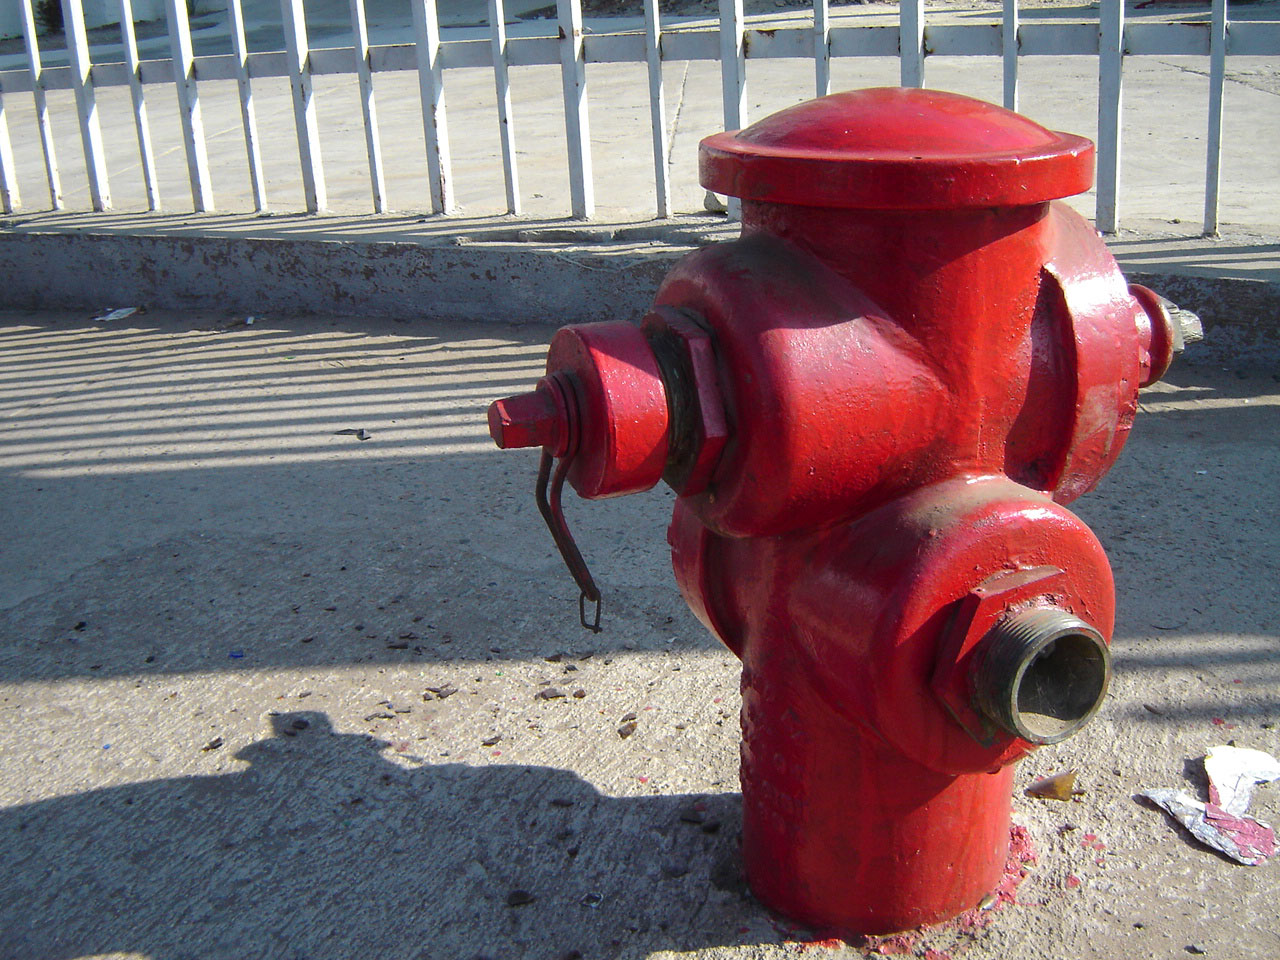 a fire hydrant on the sidewalk outside of an enclosure